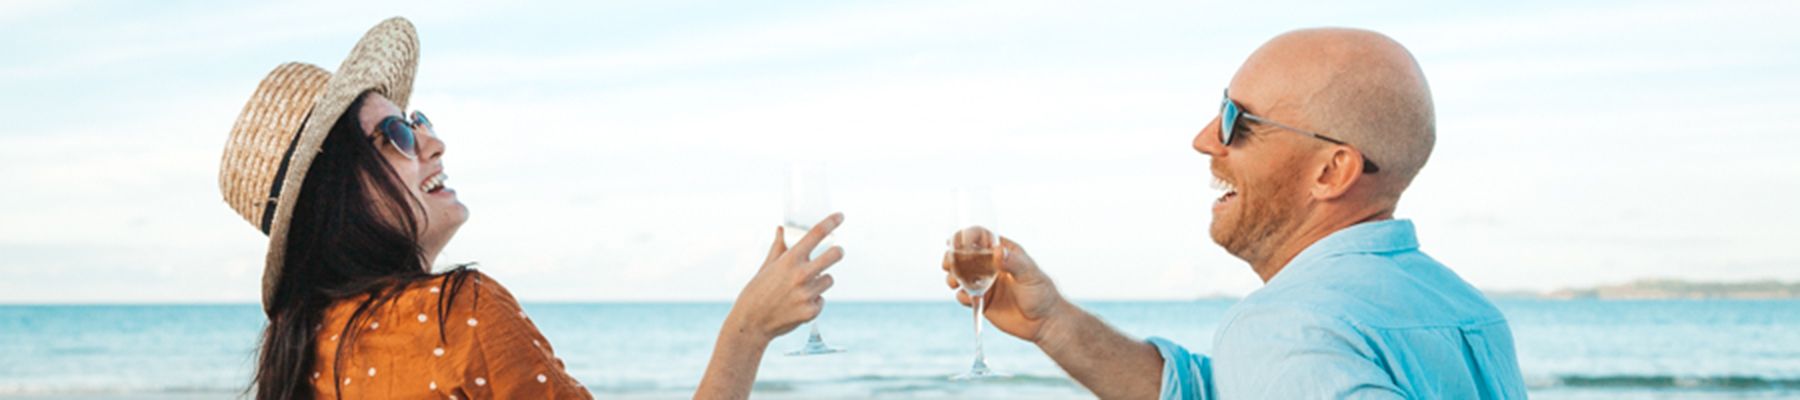 Two people laughing at each other holding up wine glasses